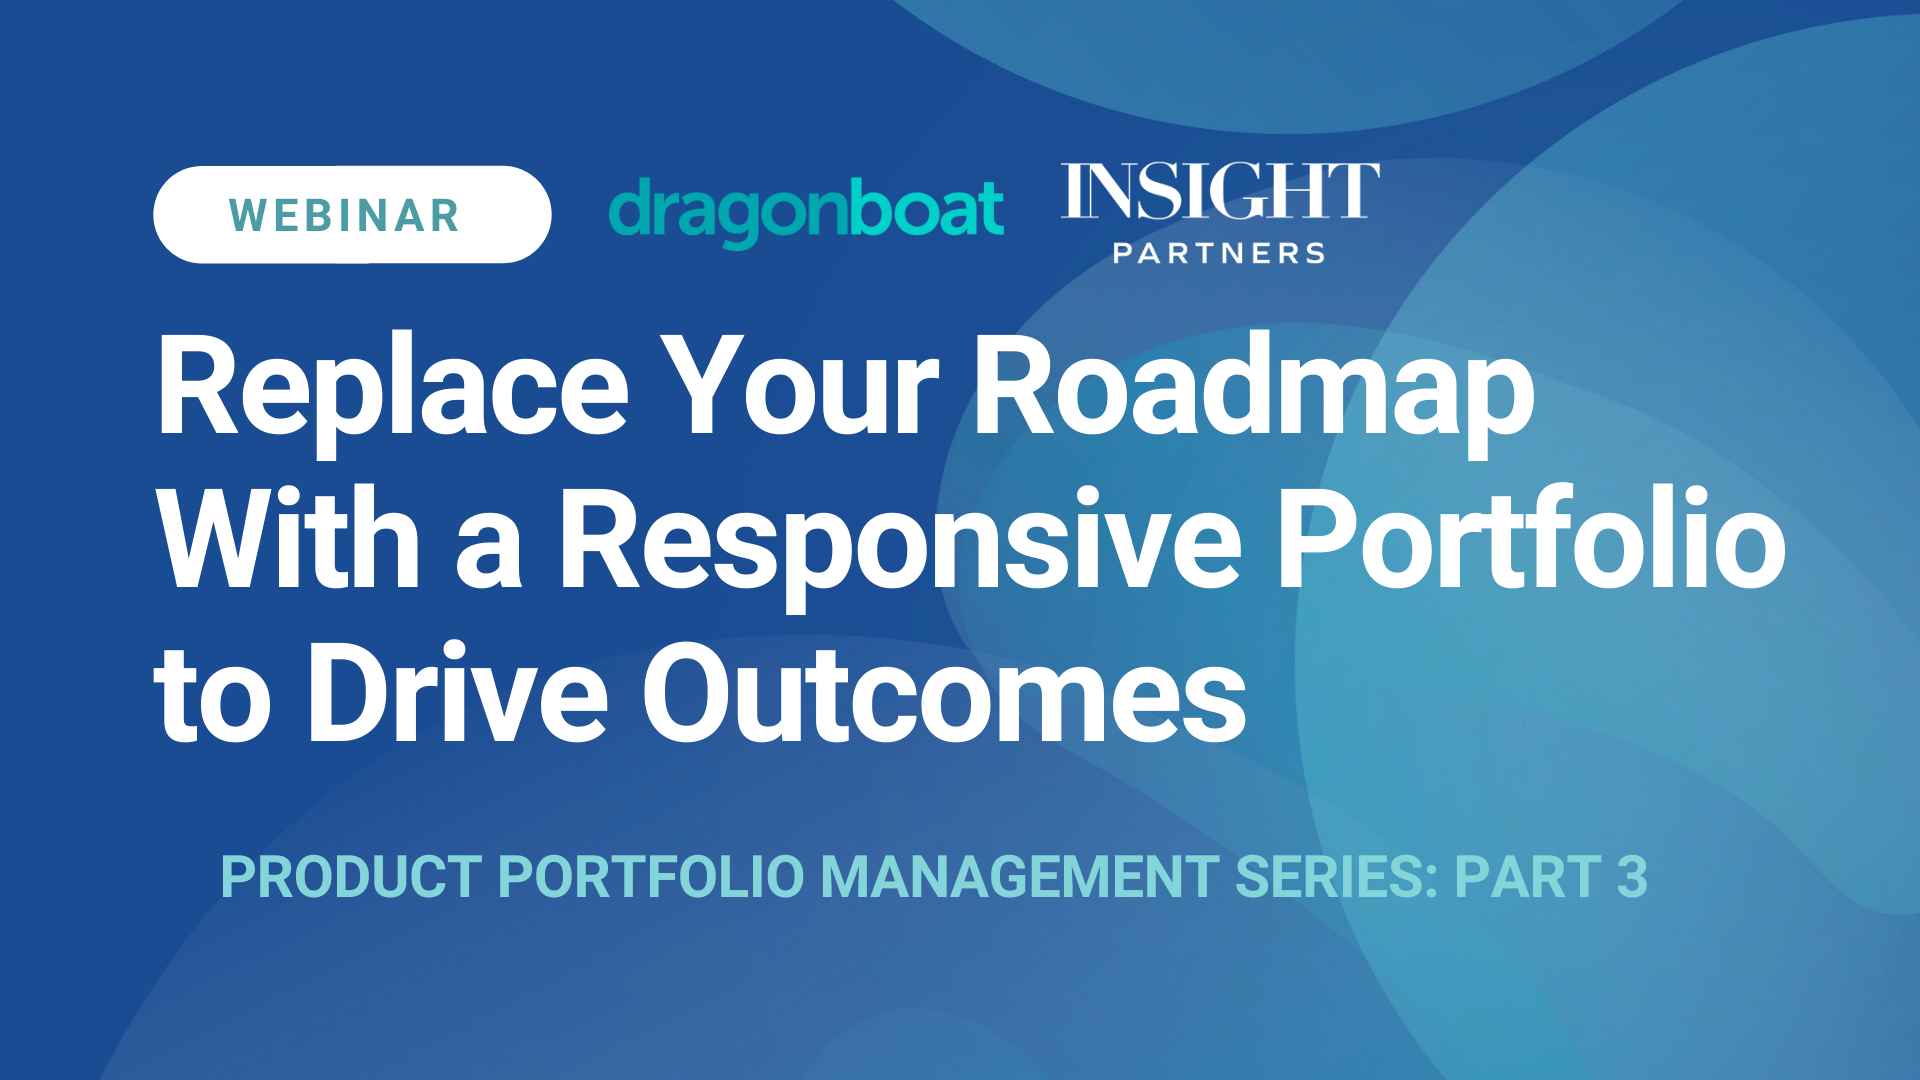 Replace Your Roadmap With a Responsive Portfolio to Drive Outcomes